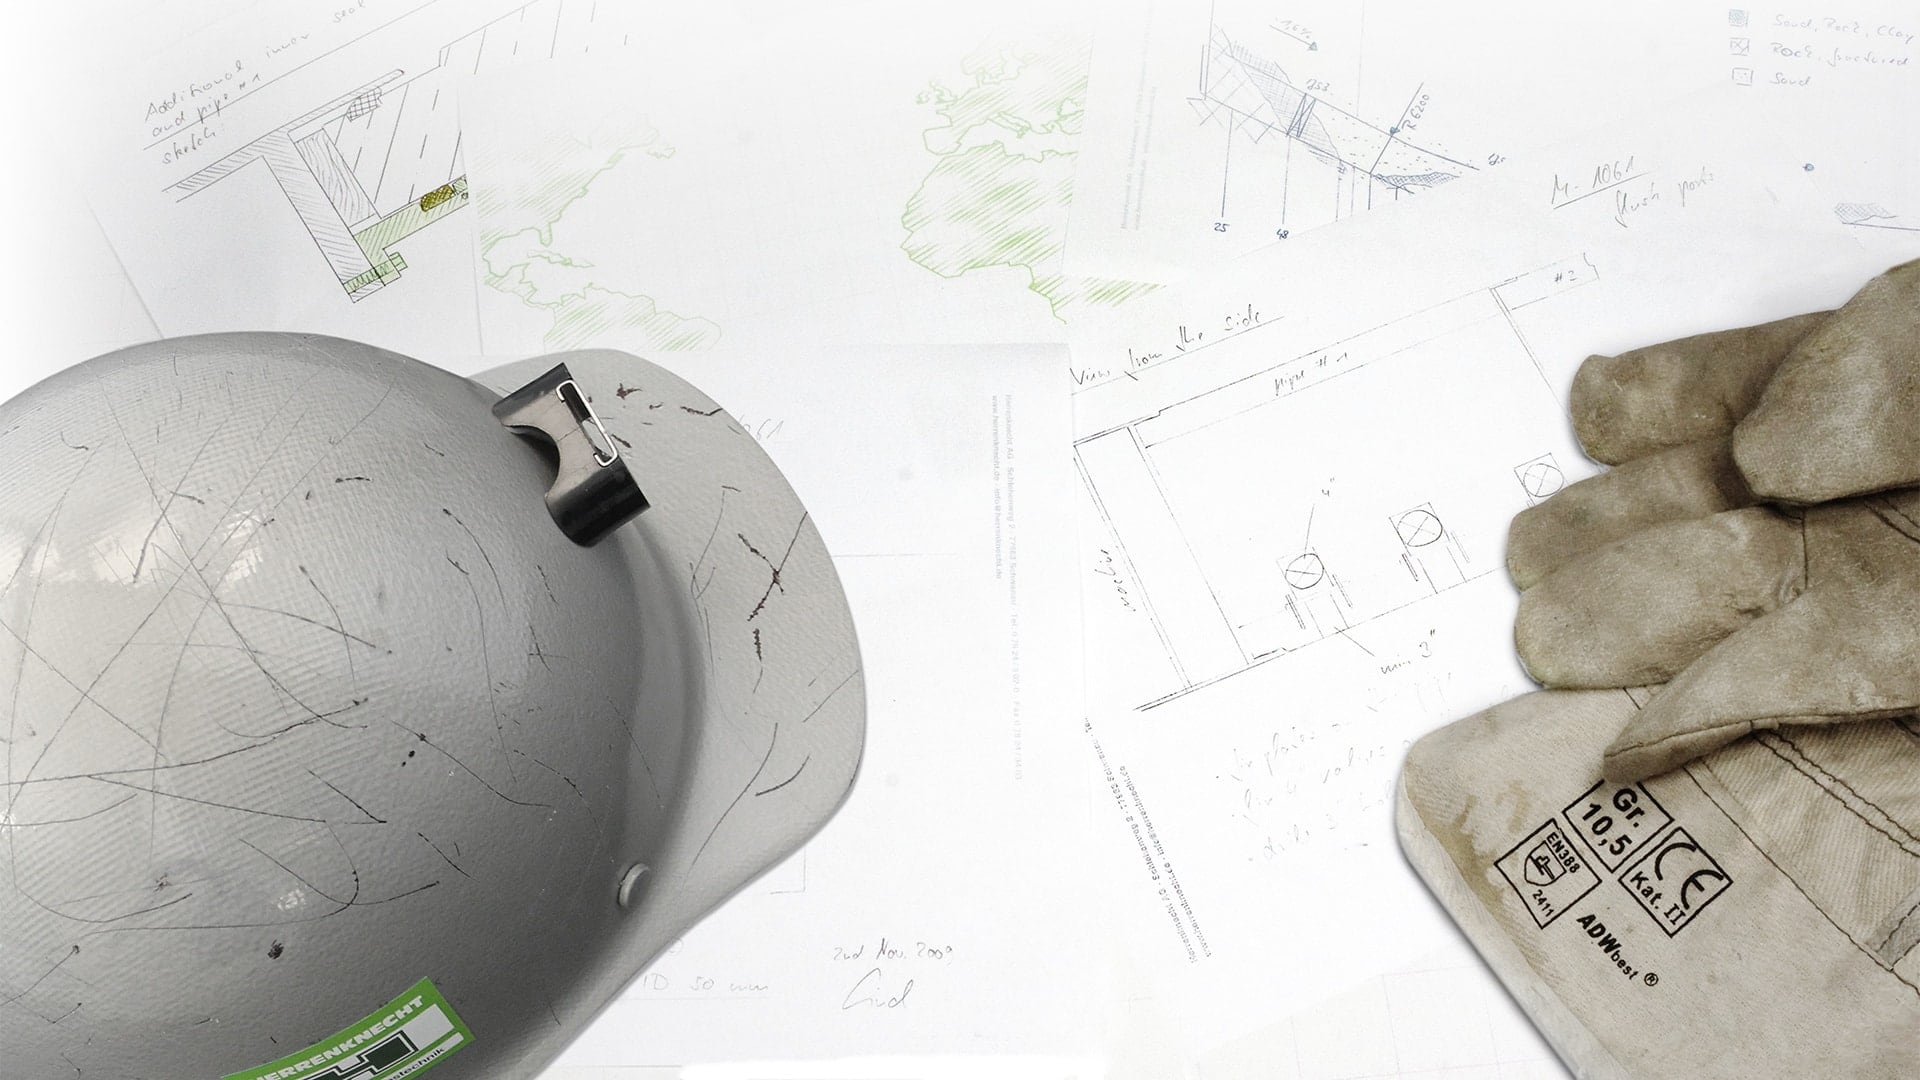 A Herrenknecht helmet with gloves lying on a project plan